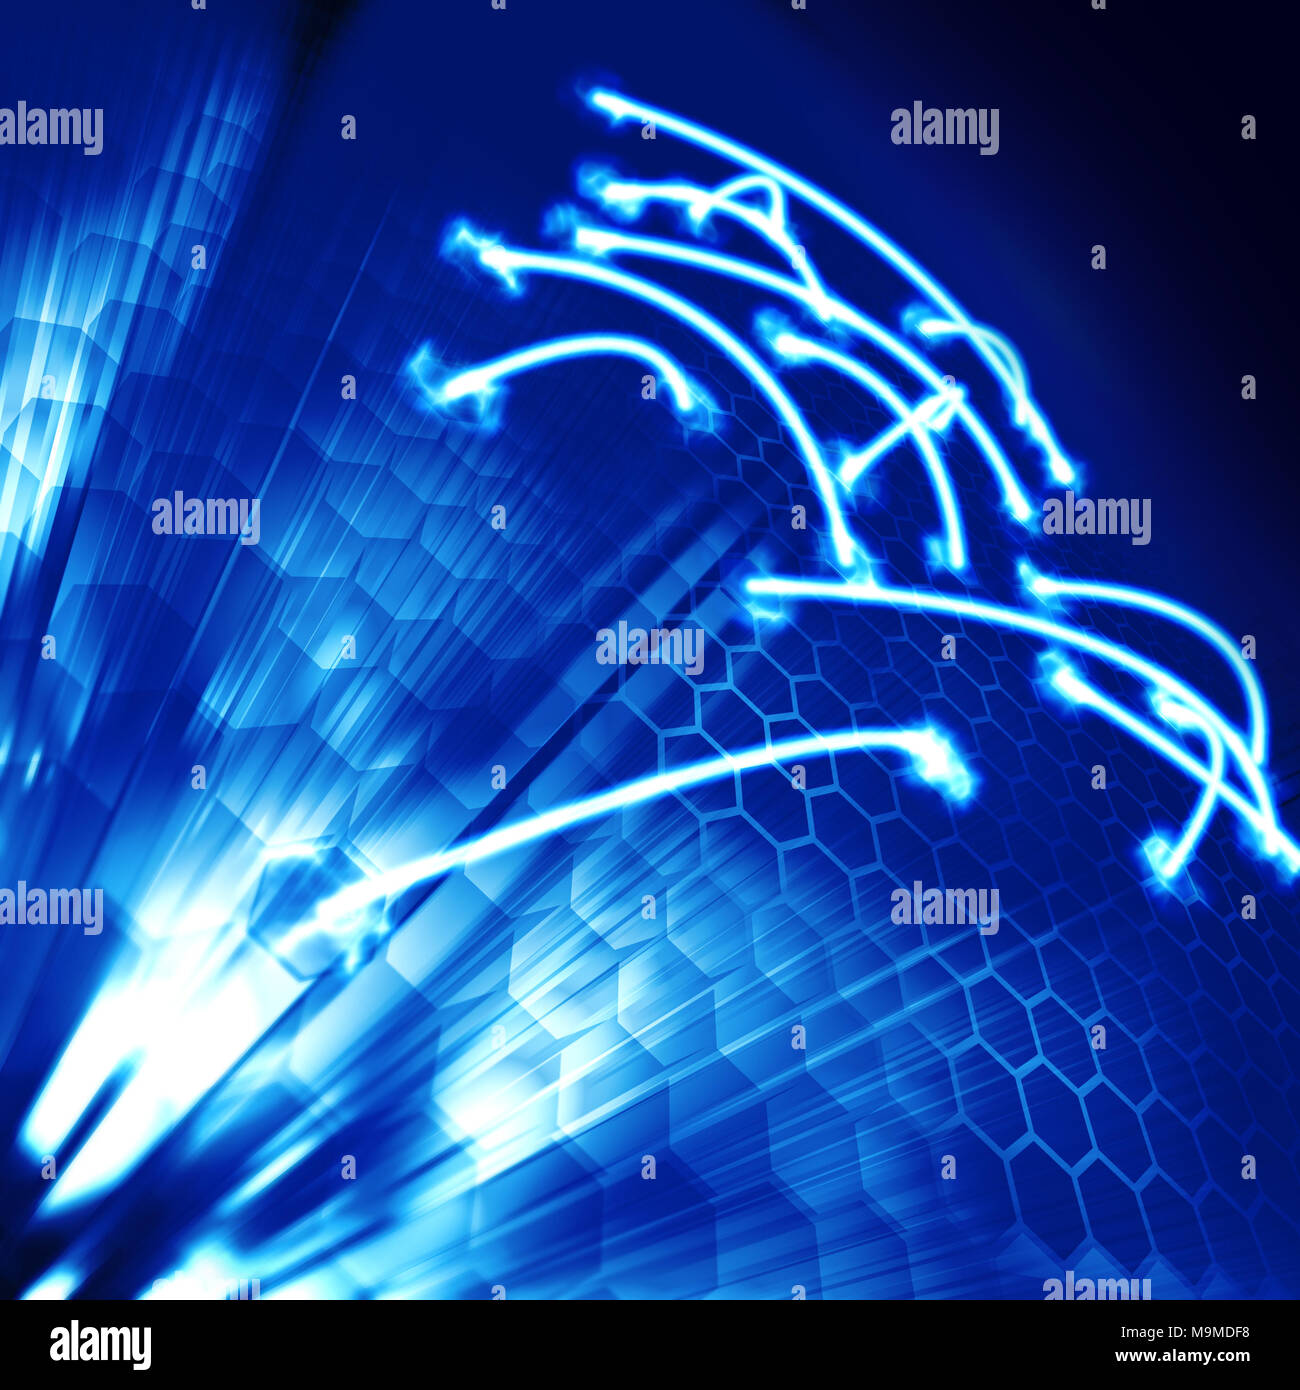 Science lights graphic background 3d rendering Stock Photo